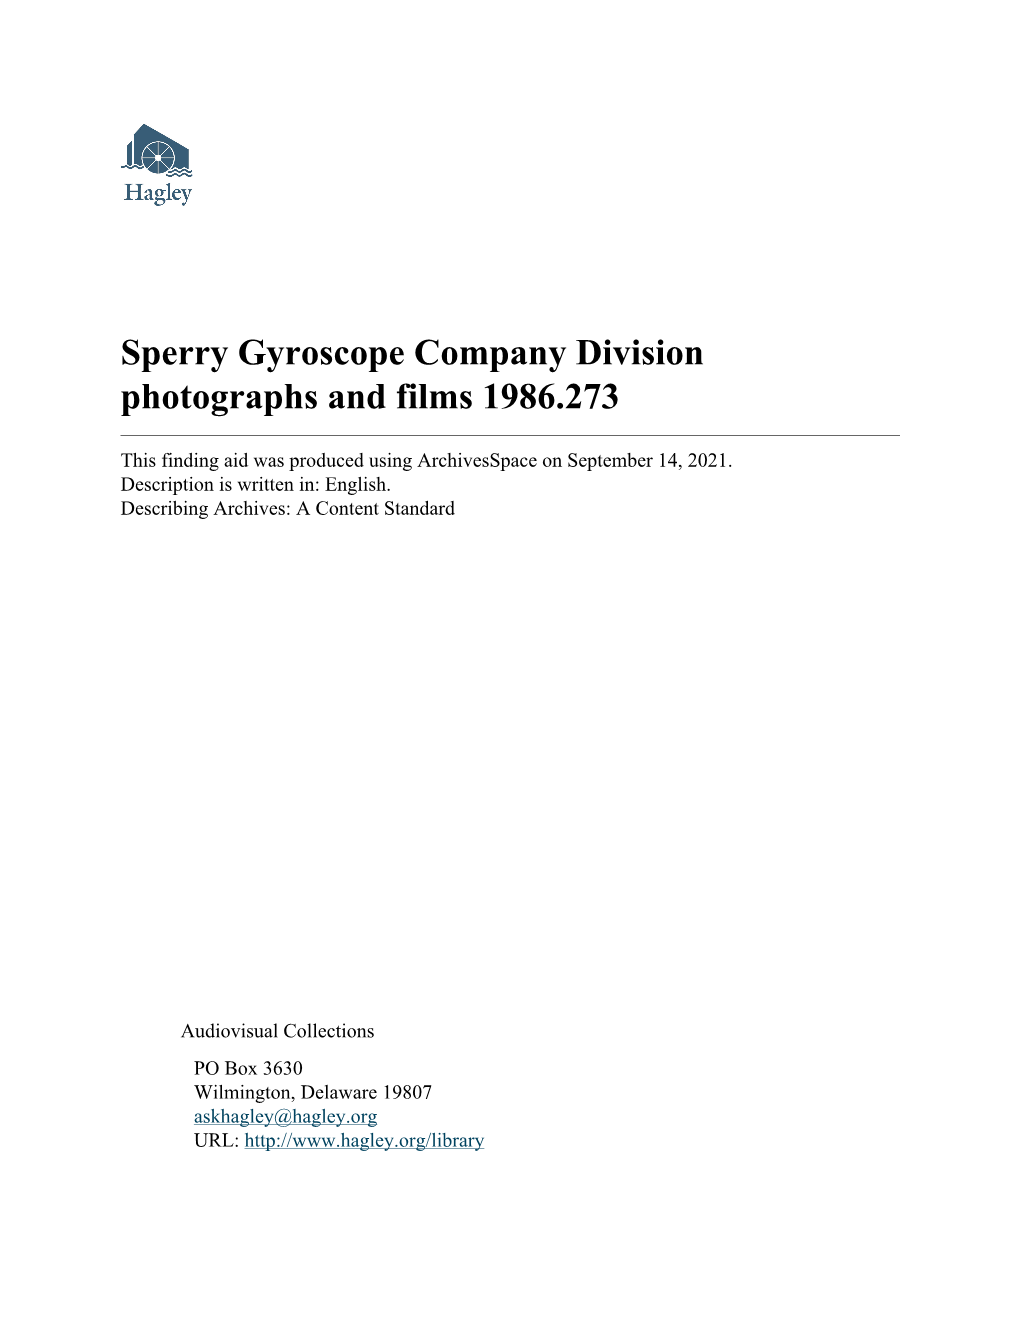 Sperry Gyroscope Company Division Photographs and Films 1986.273